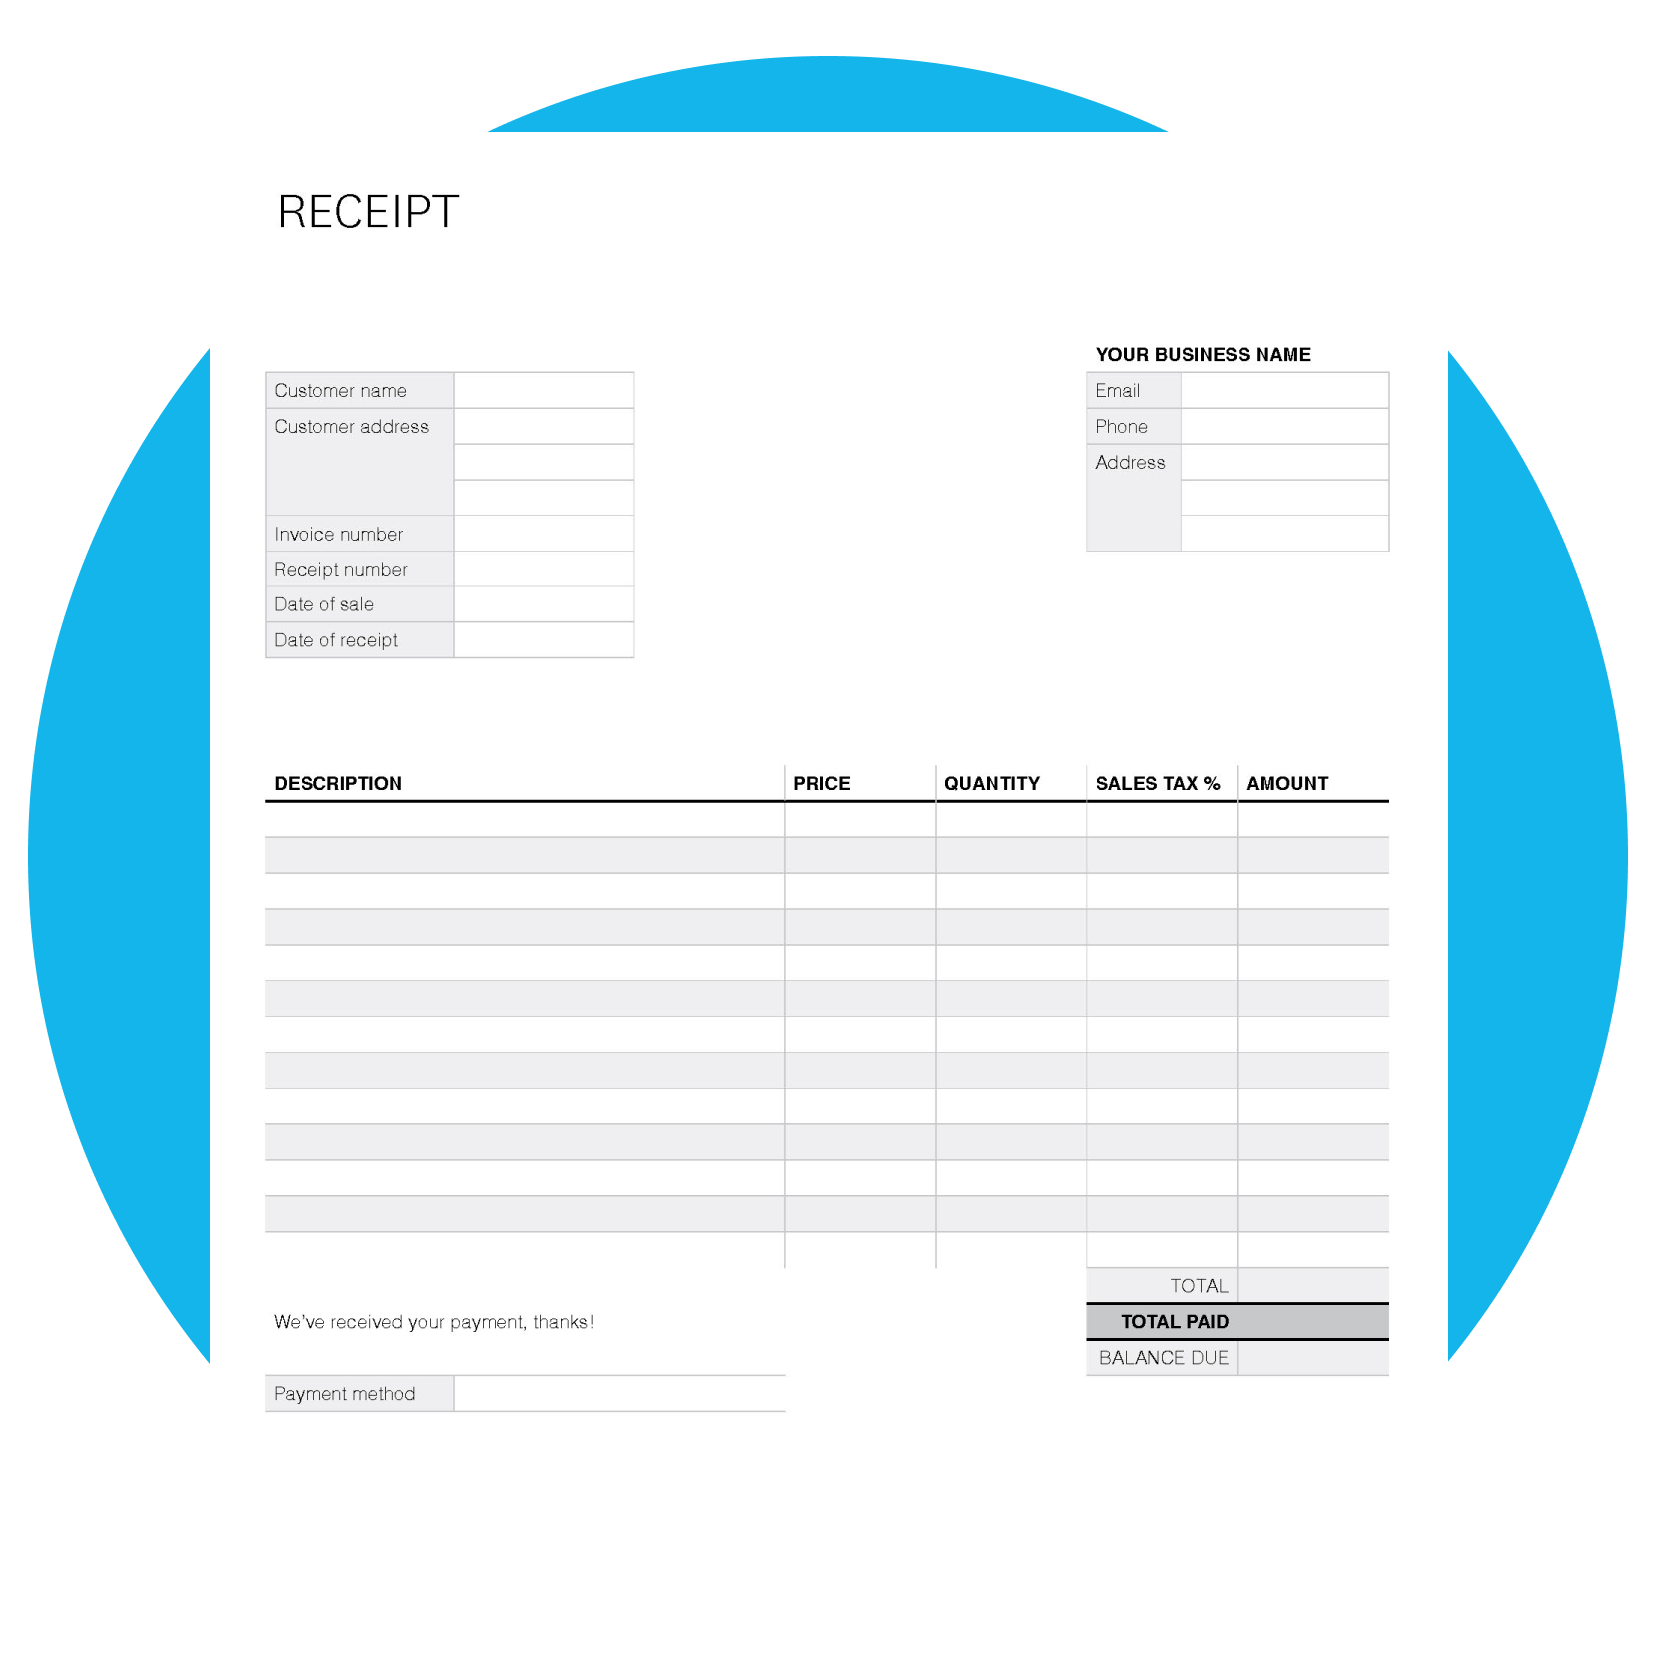 Receipt template with blank fields for users to fill out.